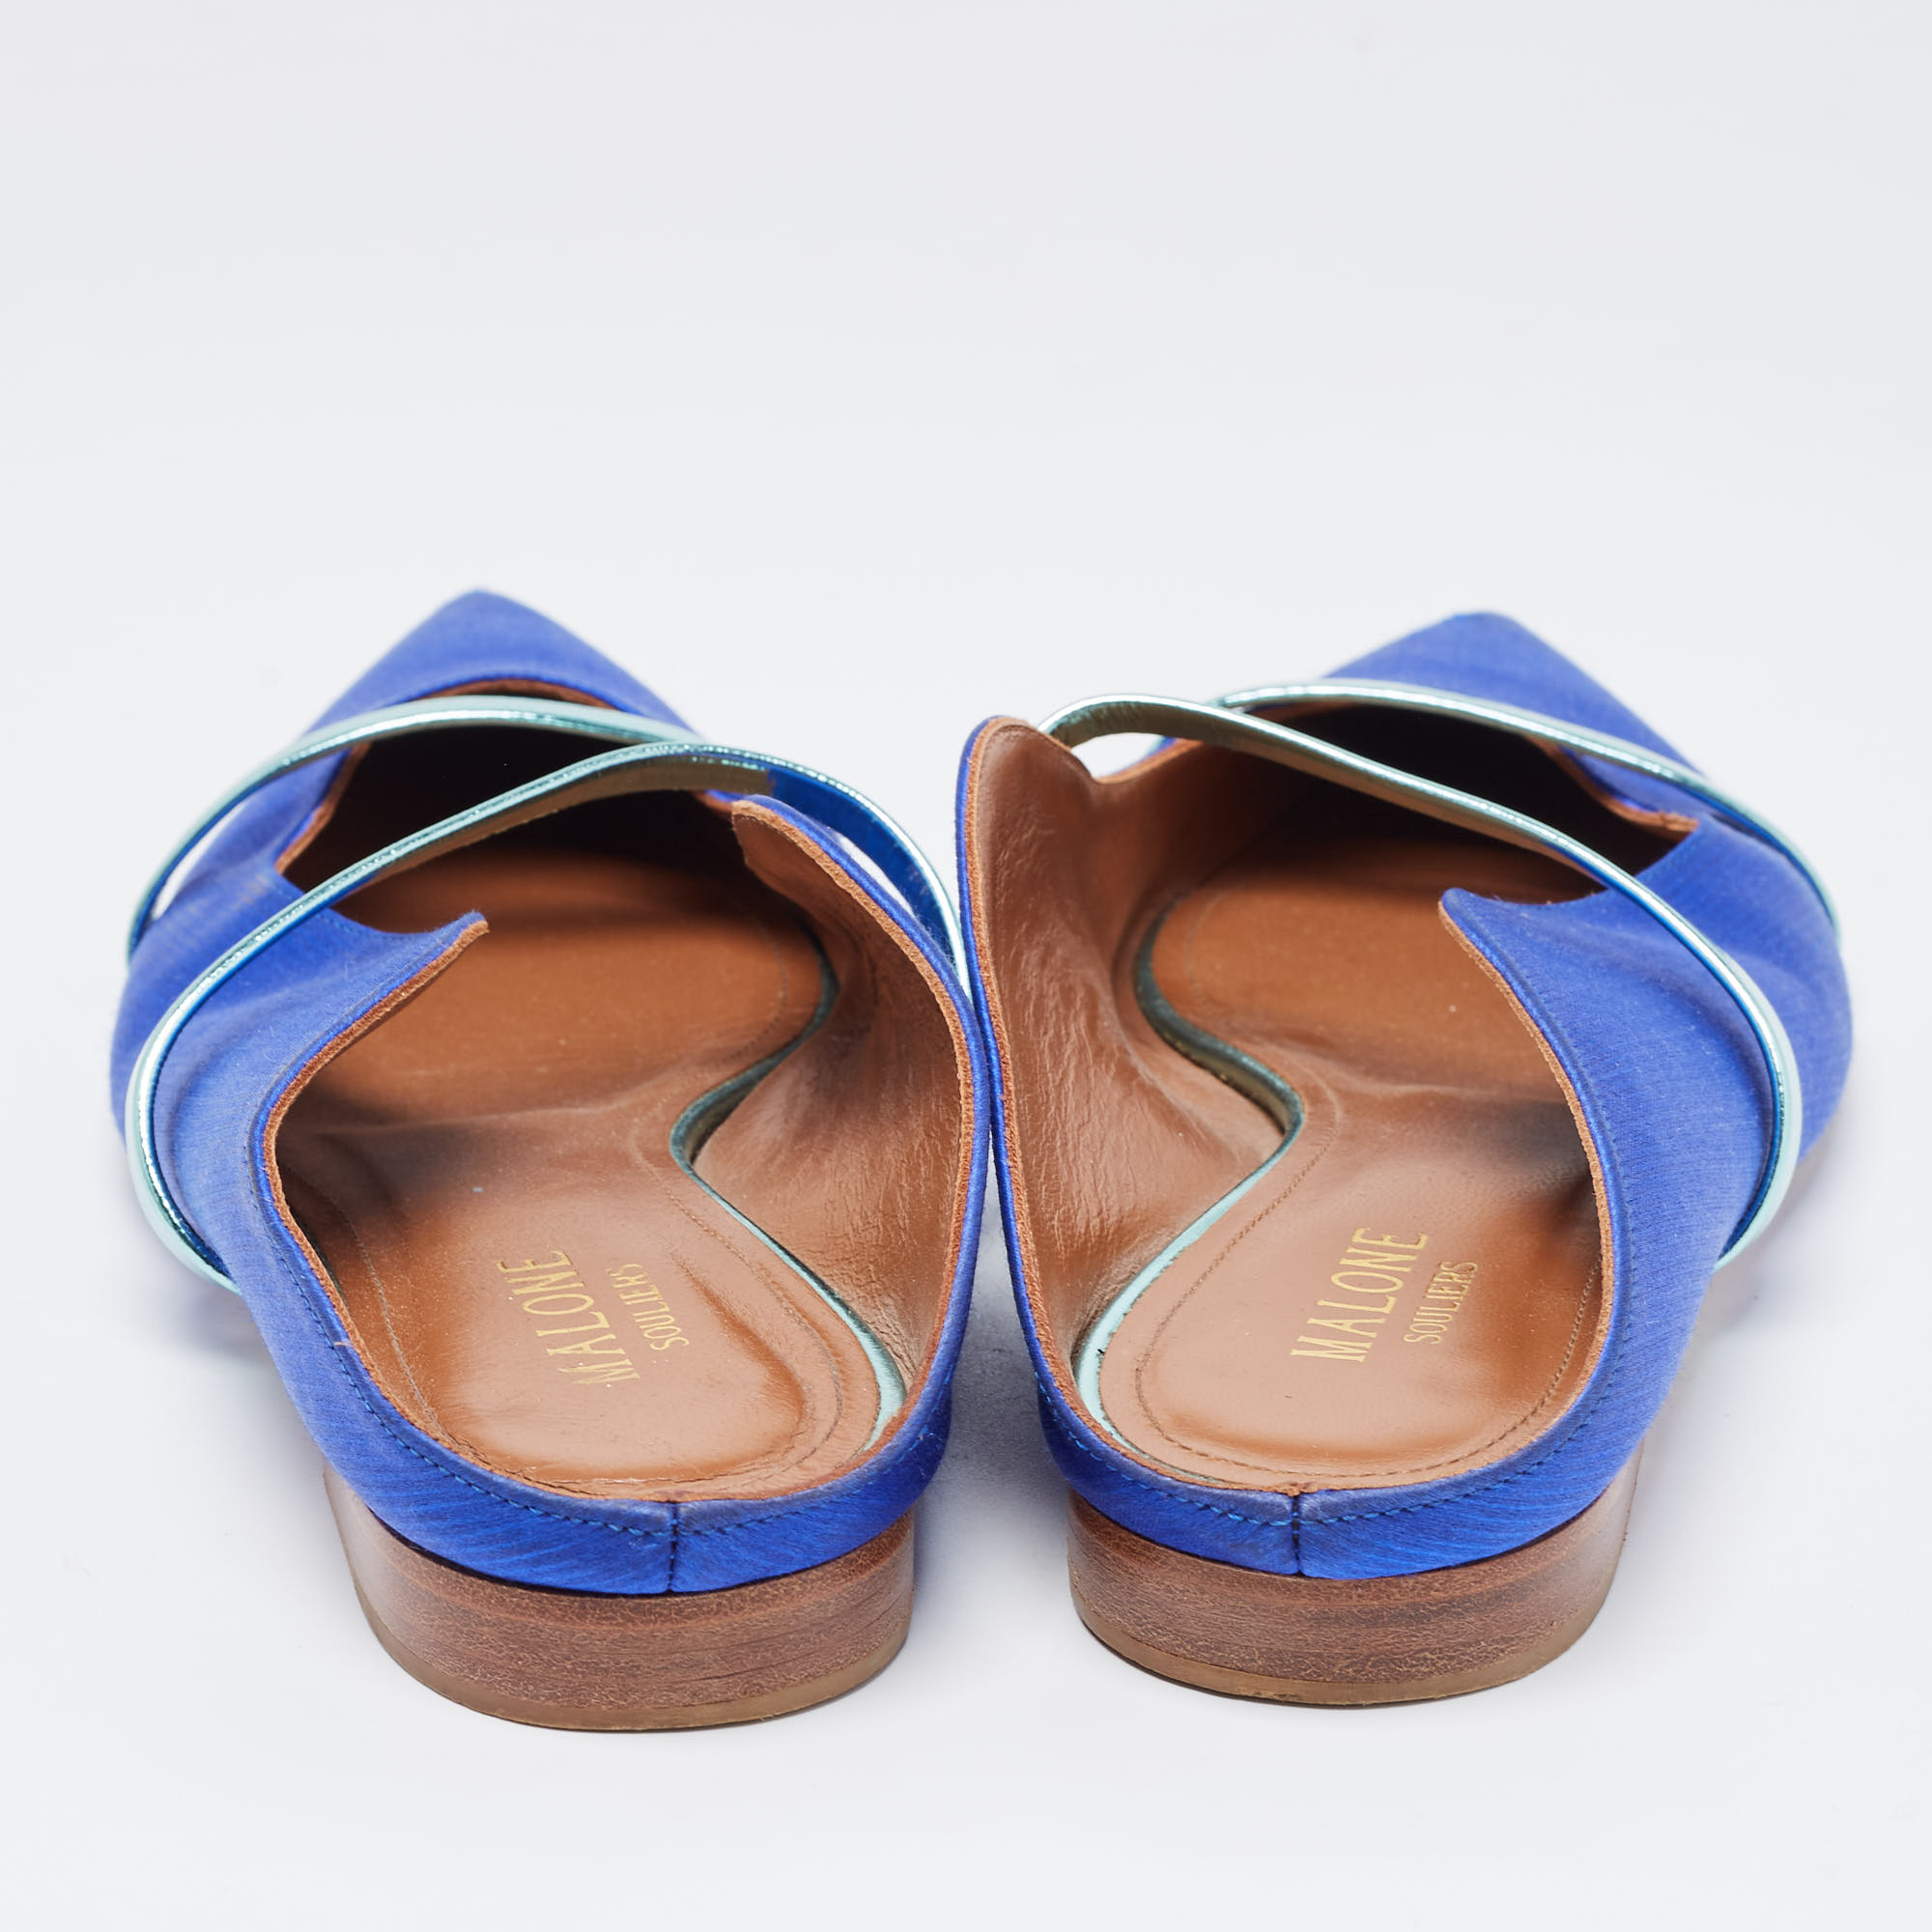 Malone Souliers Blue/Metallic Satin And Leather Maureen Flats Size 37